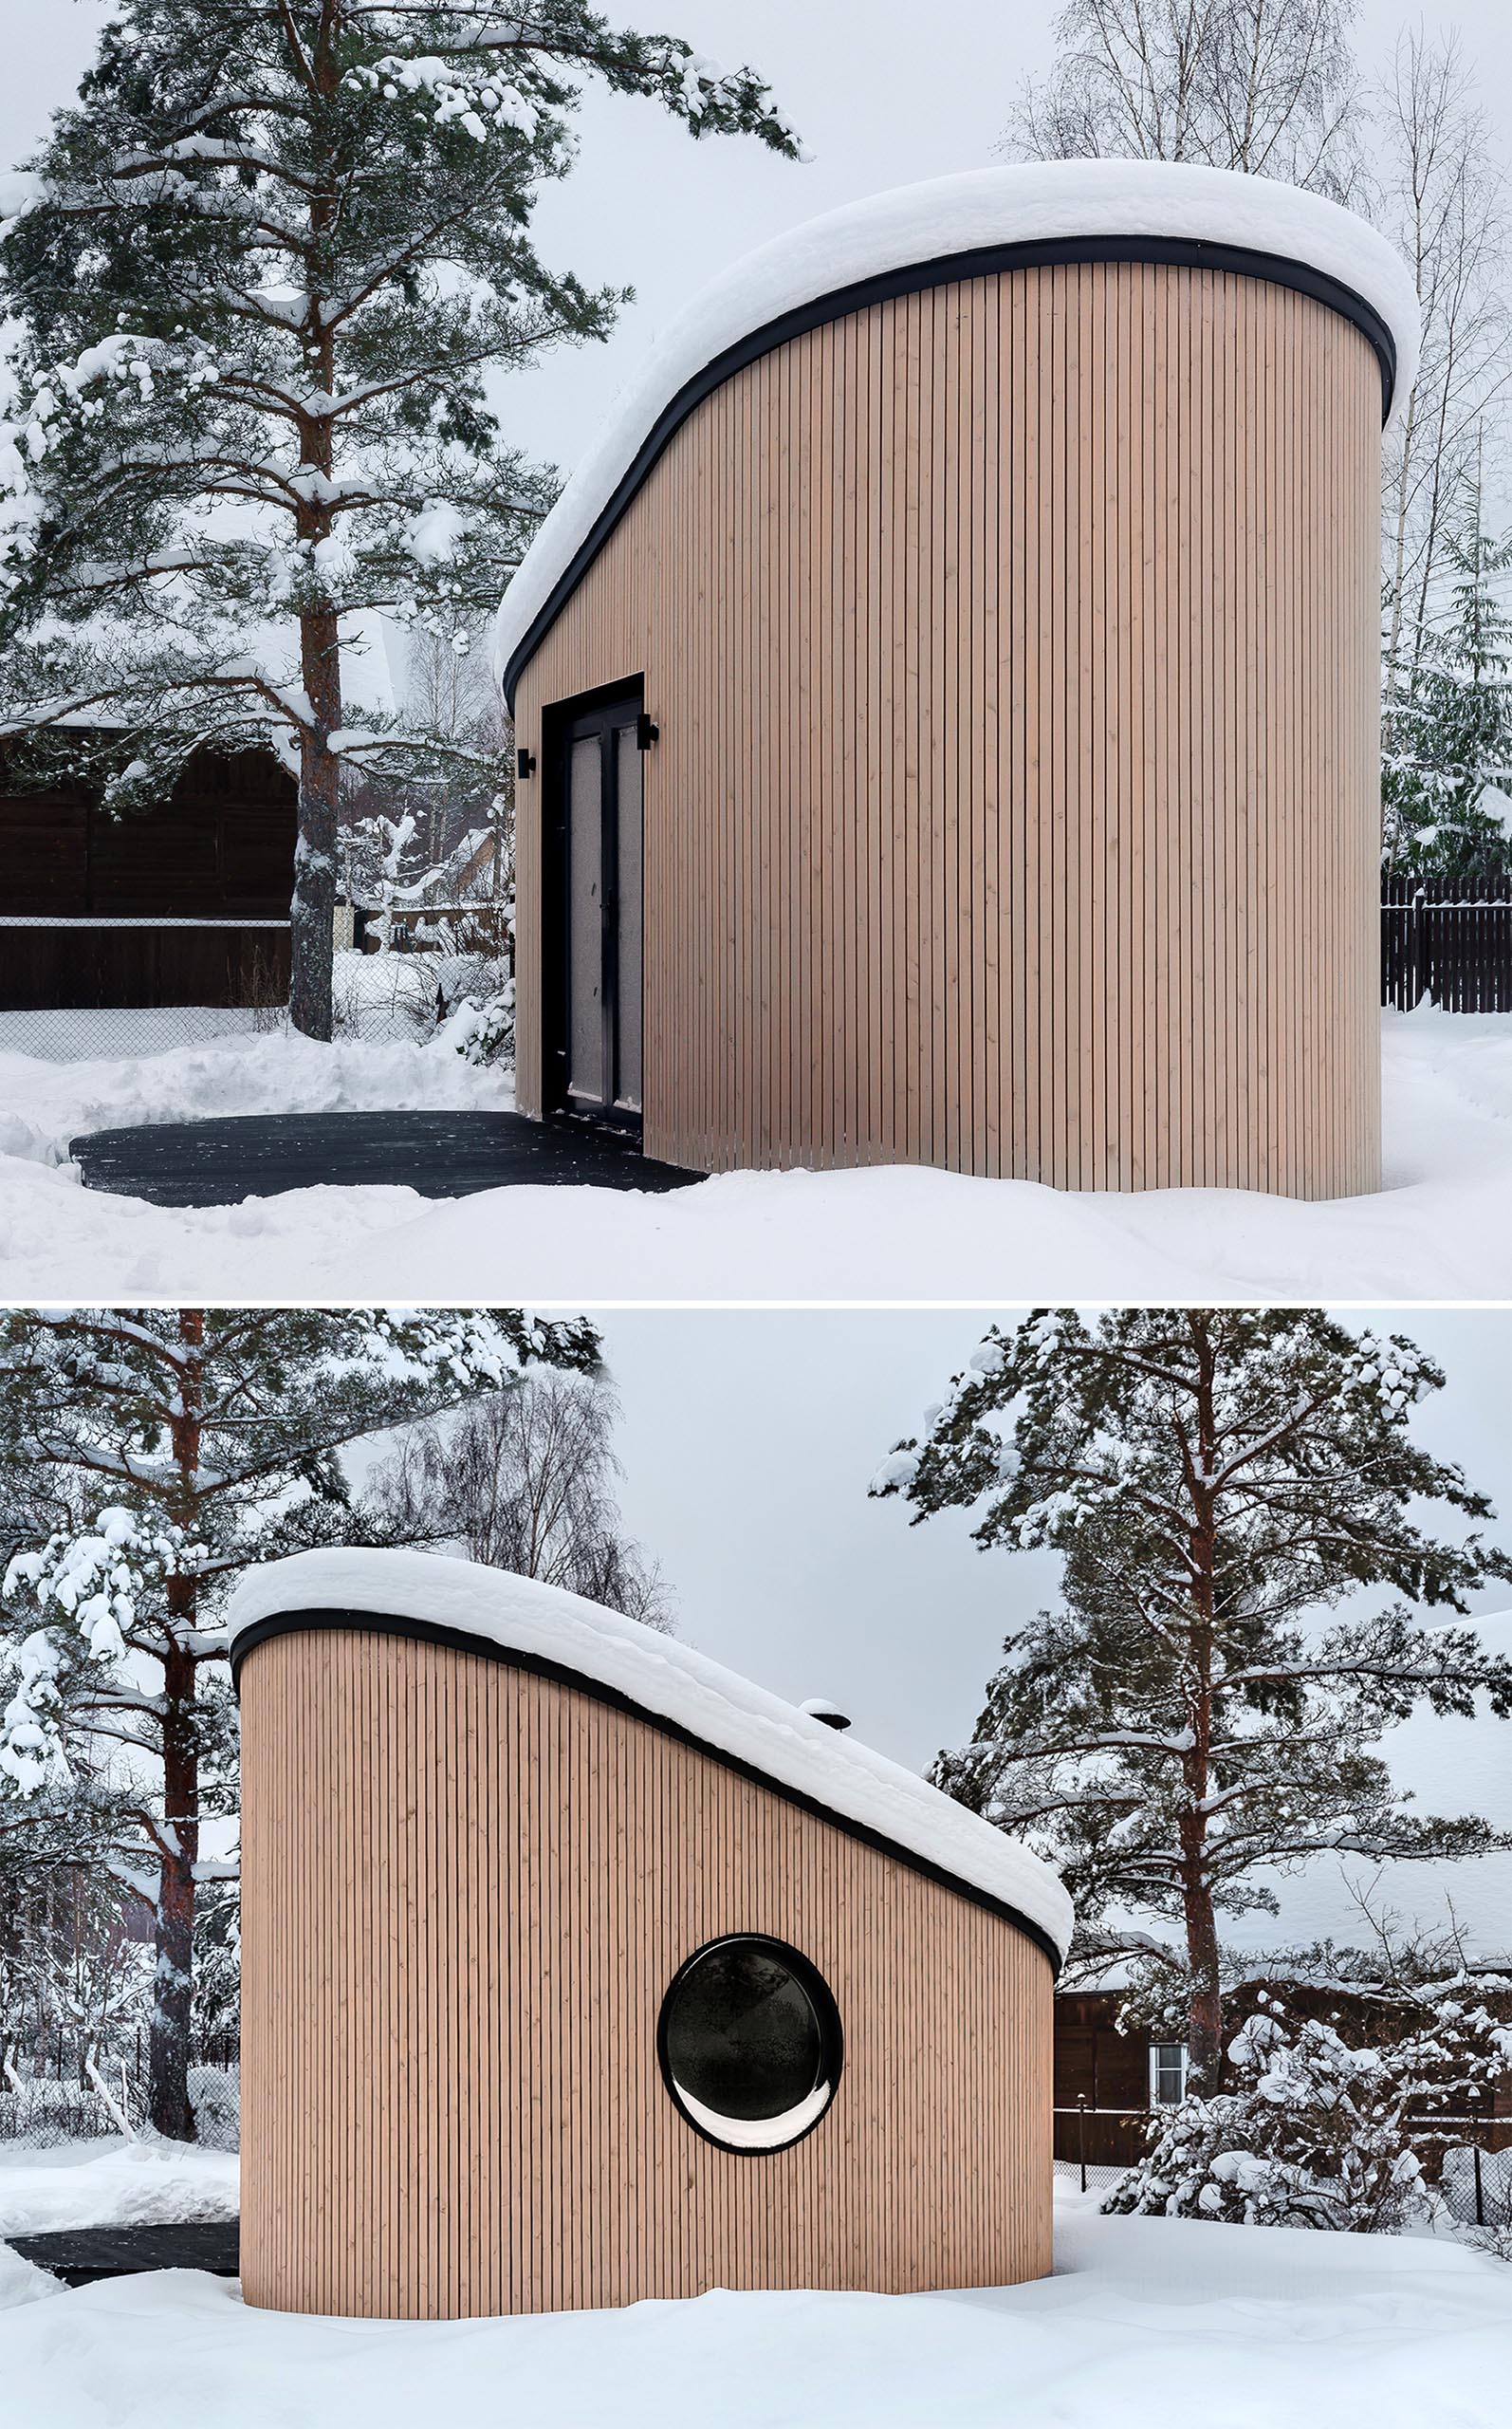 A small module pod with a curved wood exterior that can be used as an office pod, guest house, tiny house, or backyard BBQ house.